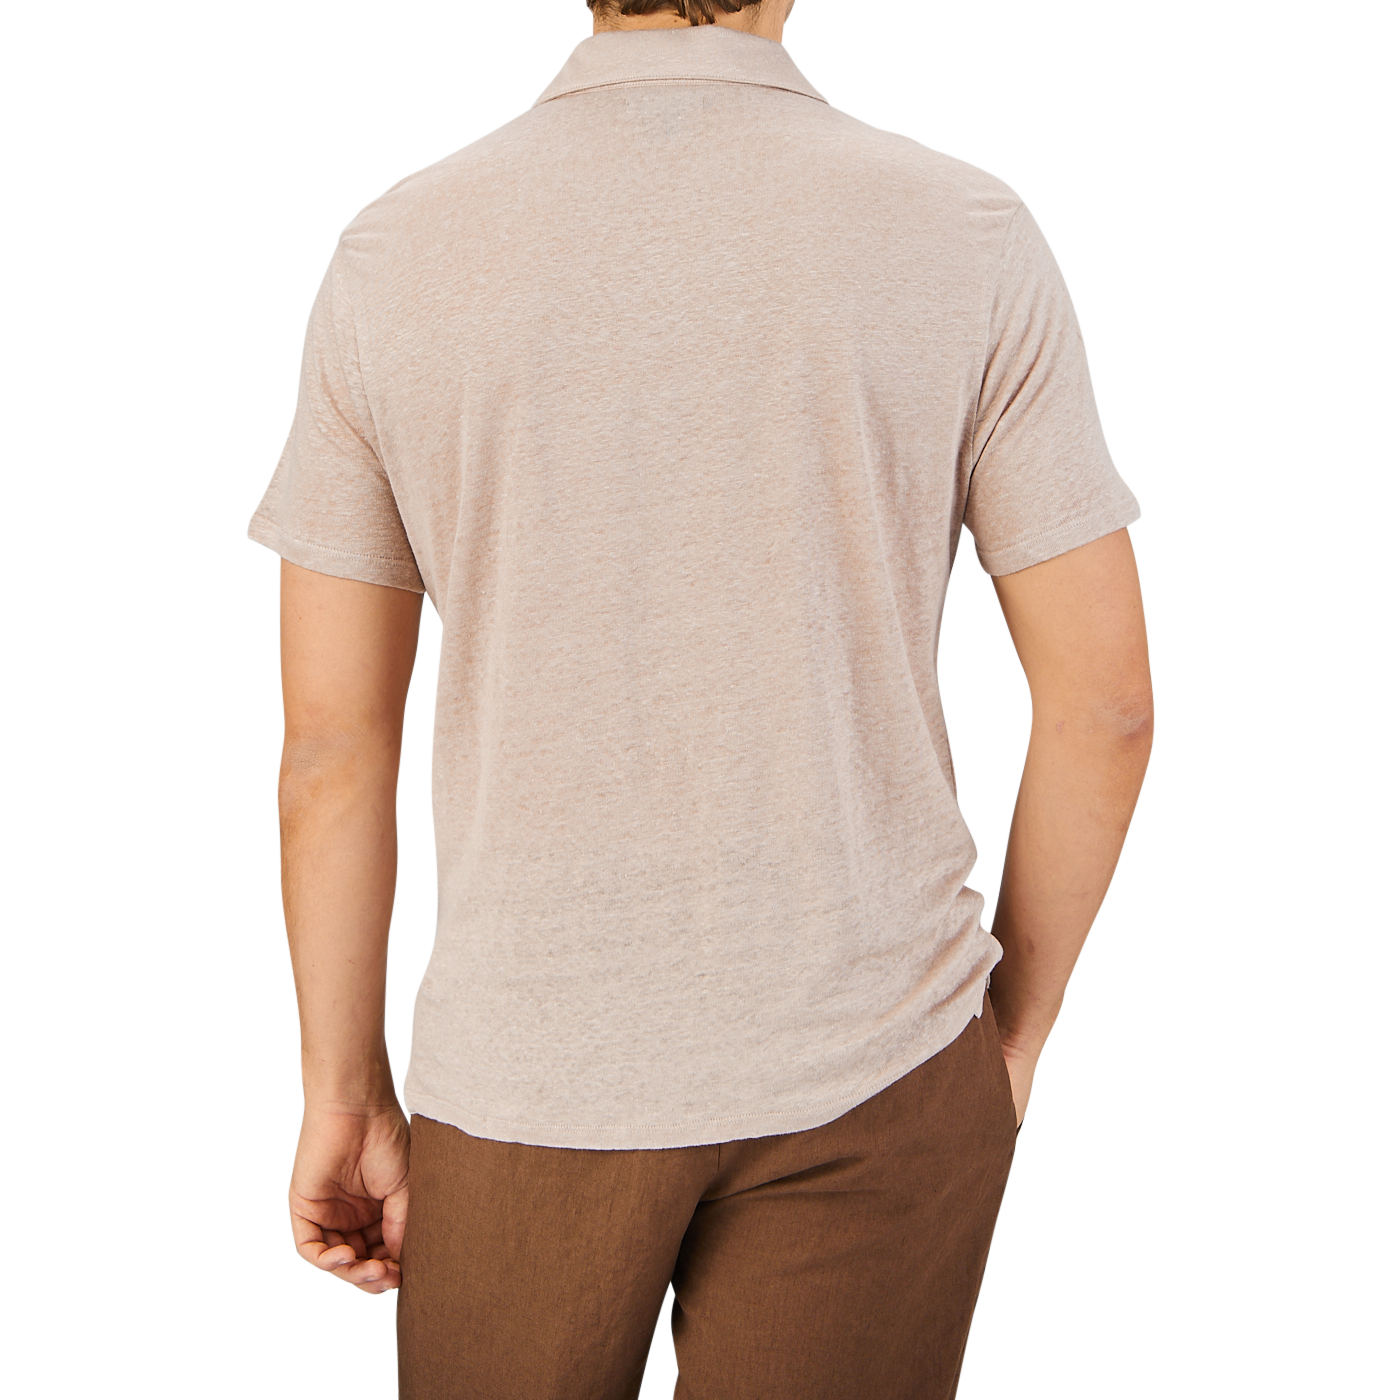 Rear view of a man wearing a Paige Light Pink Linen Capri Collar Polo Shirt and brown pants, standing against a plain grey background.